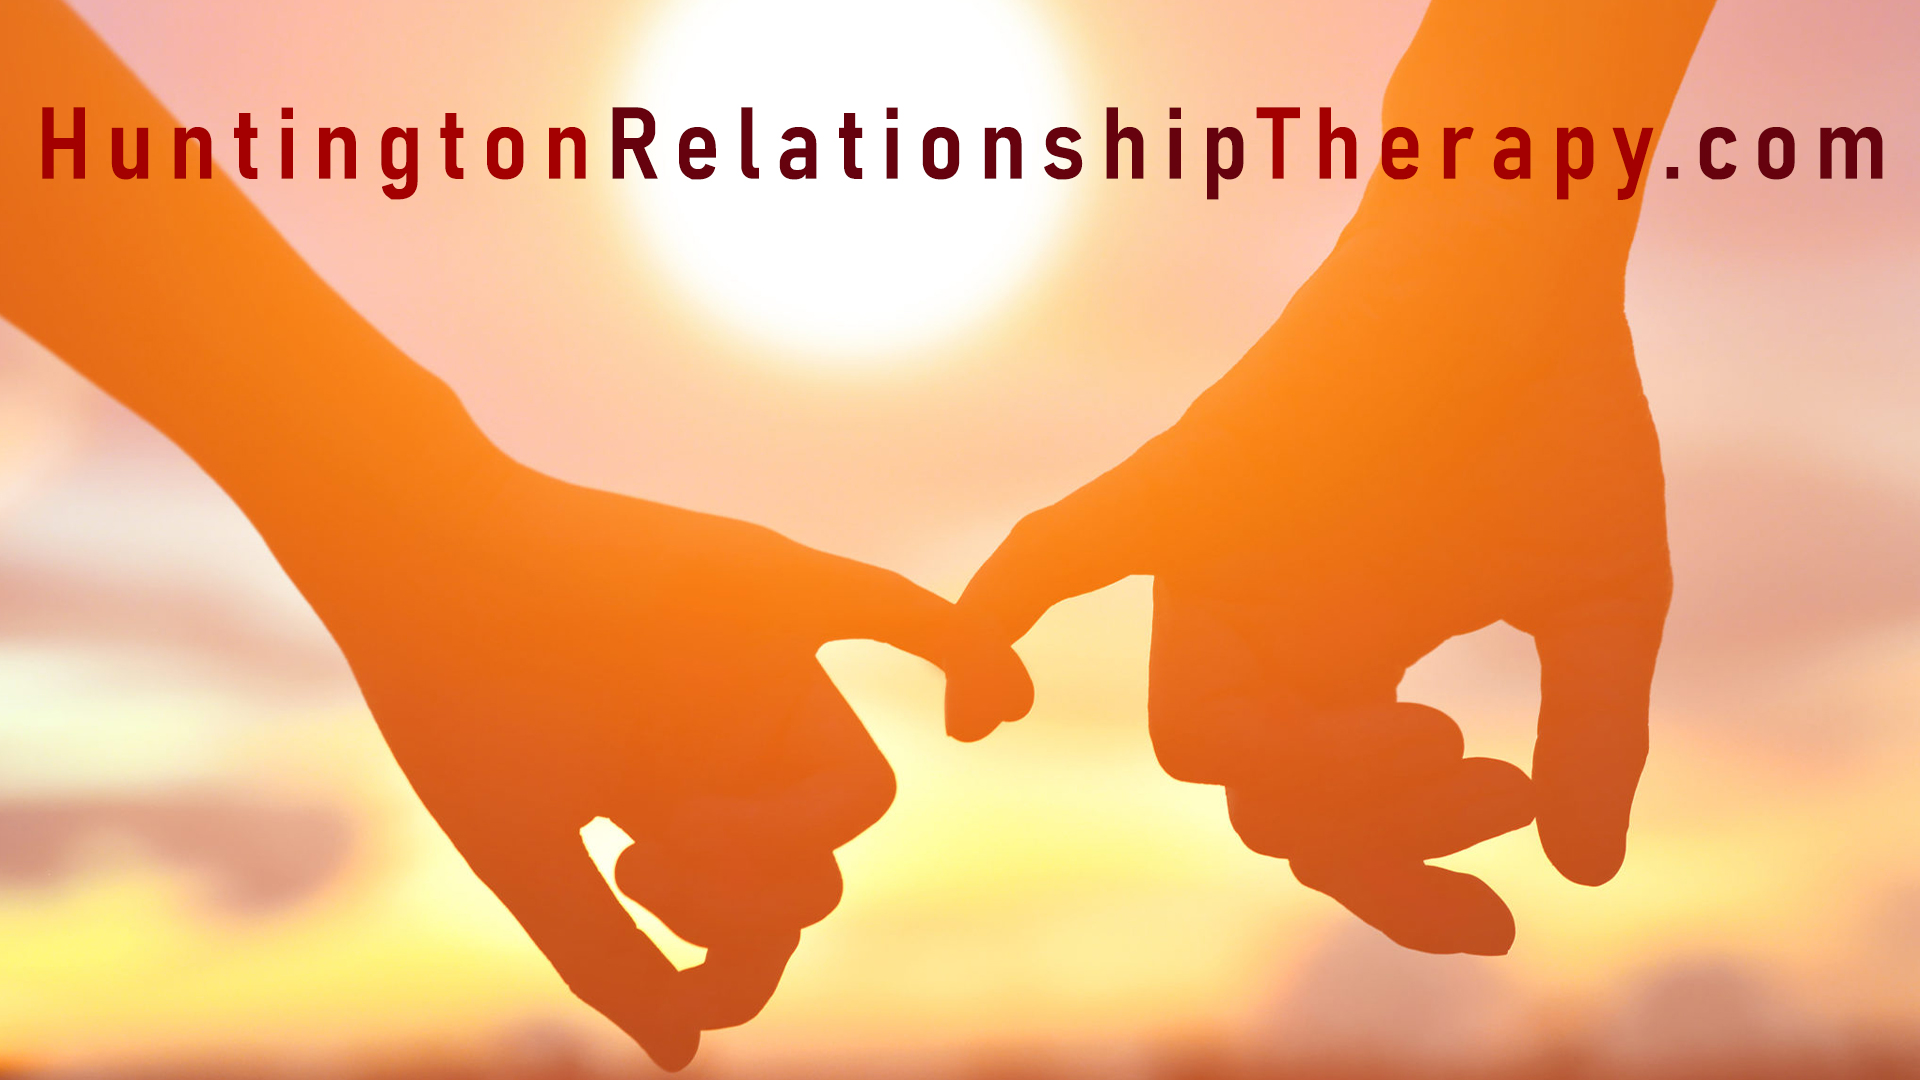 Invest in your Love: HuntingtonRelationshipTherapy.com